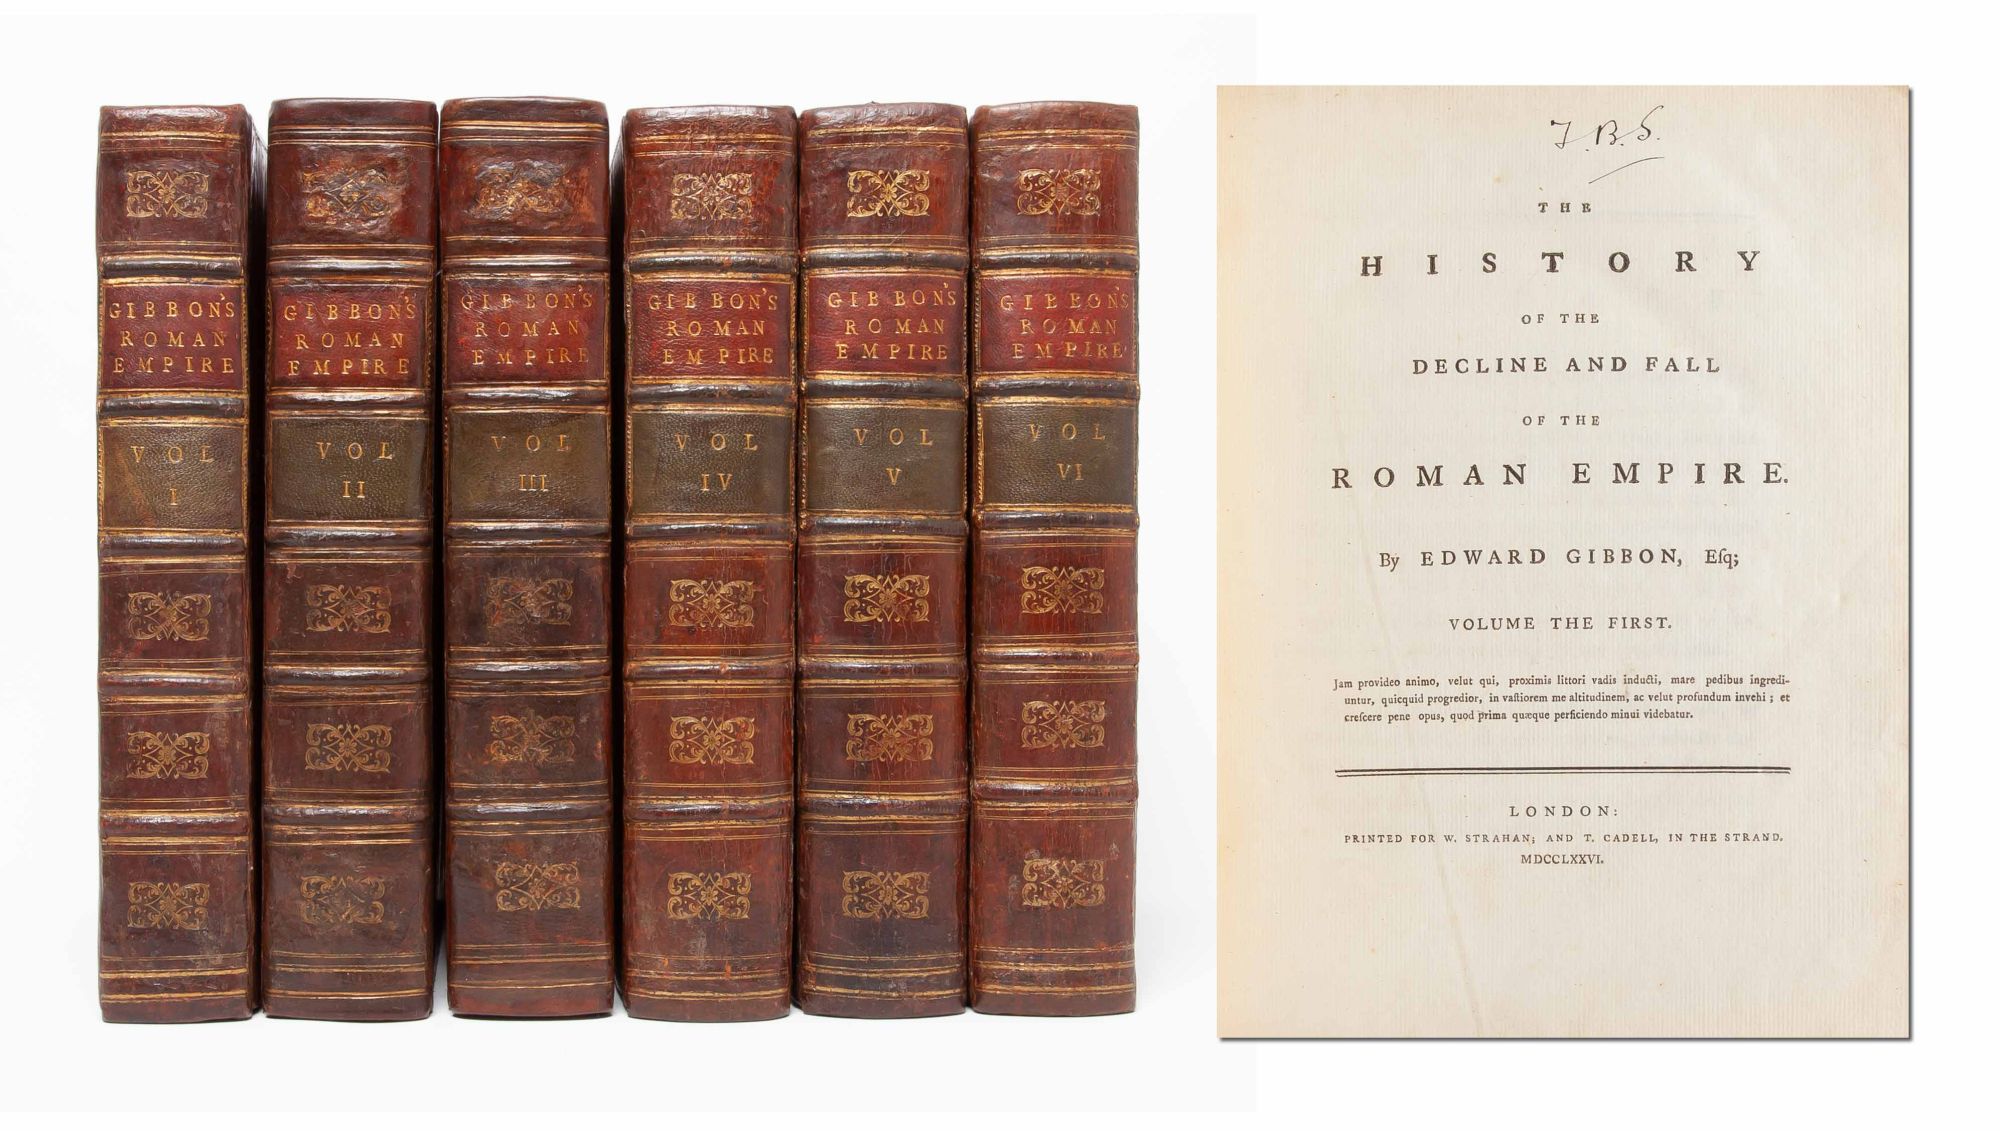 (Item #5602) The History of the Decline and Fall of the Roman Empire. Edward Gibbon.